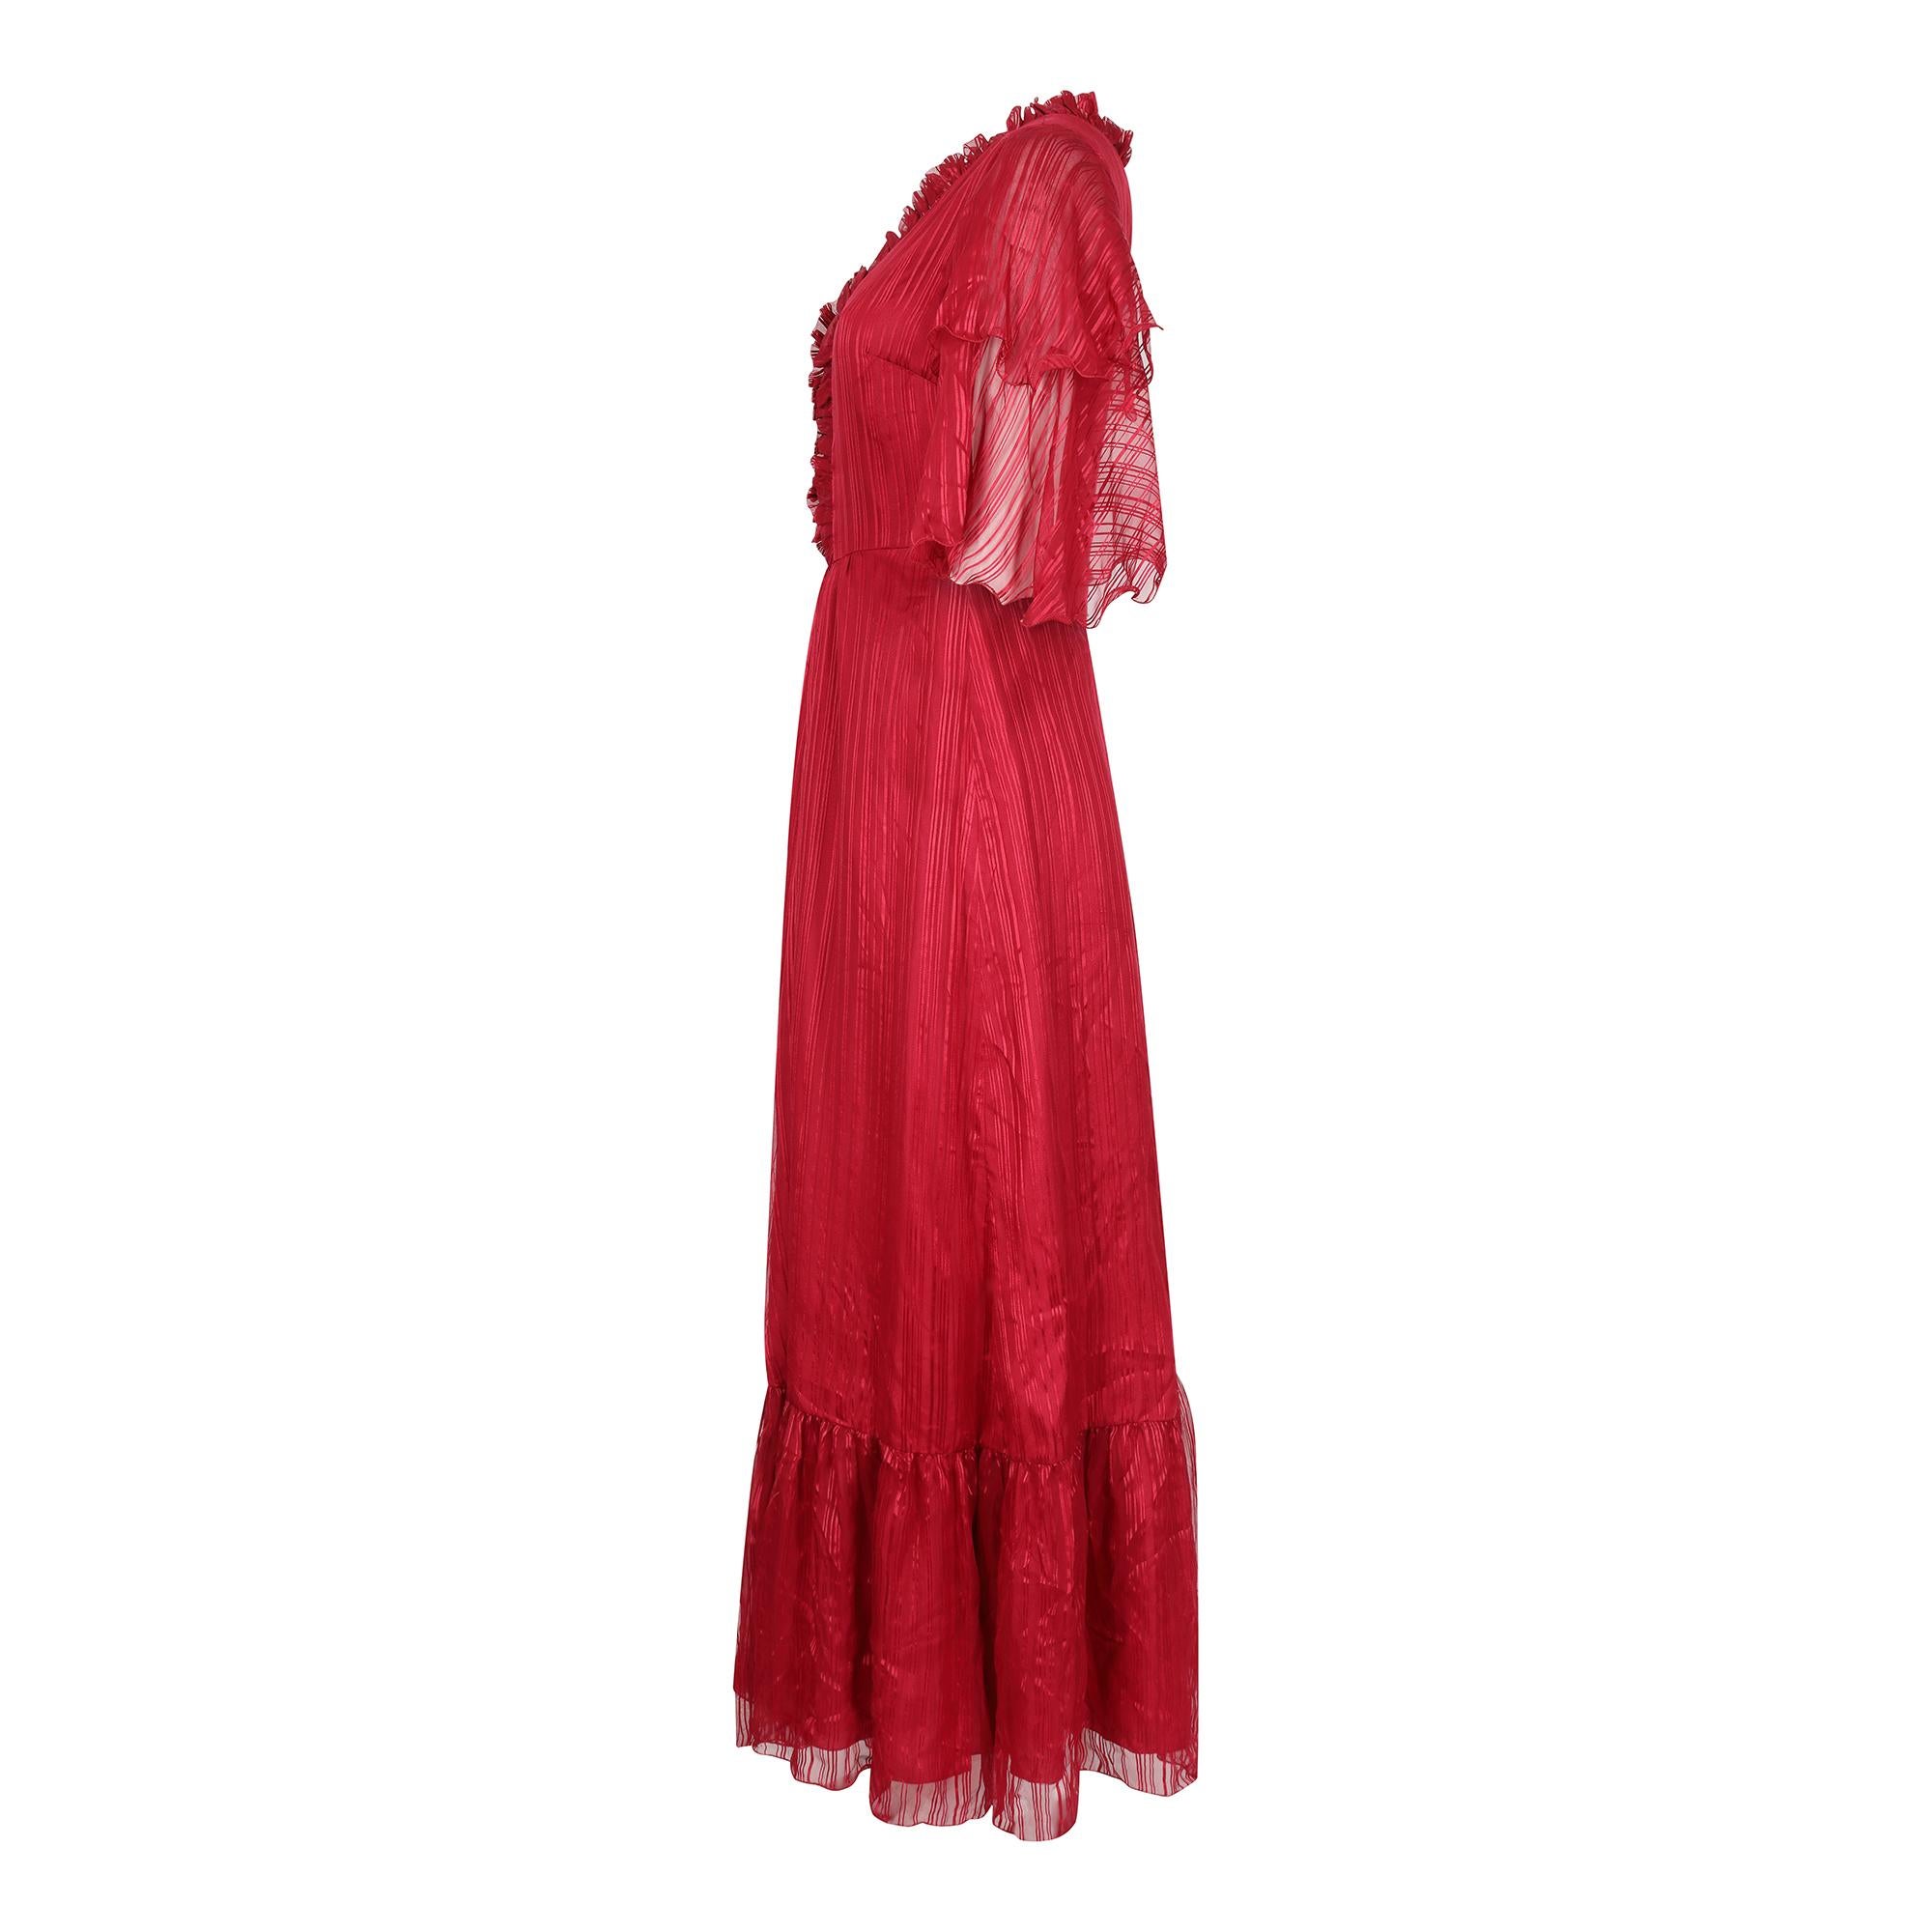 This is a superb example of 1970s lux Victoriana fashion and has many high end couture elements and tailoring. The dress is made of the finest scarlet red silk chiffon in contrasting ribbon bands and the design is synonymous with the long flowing